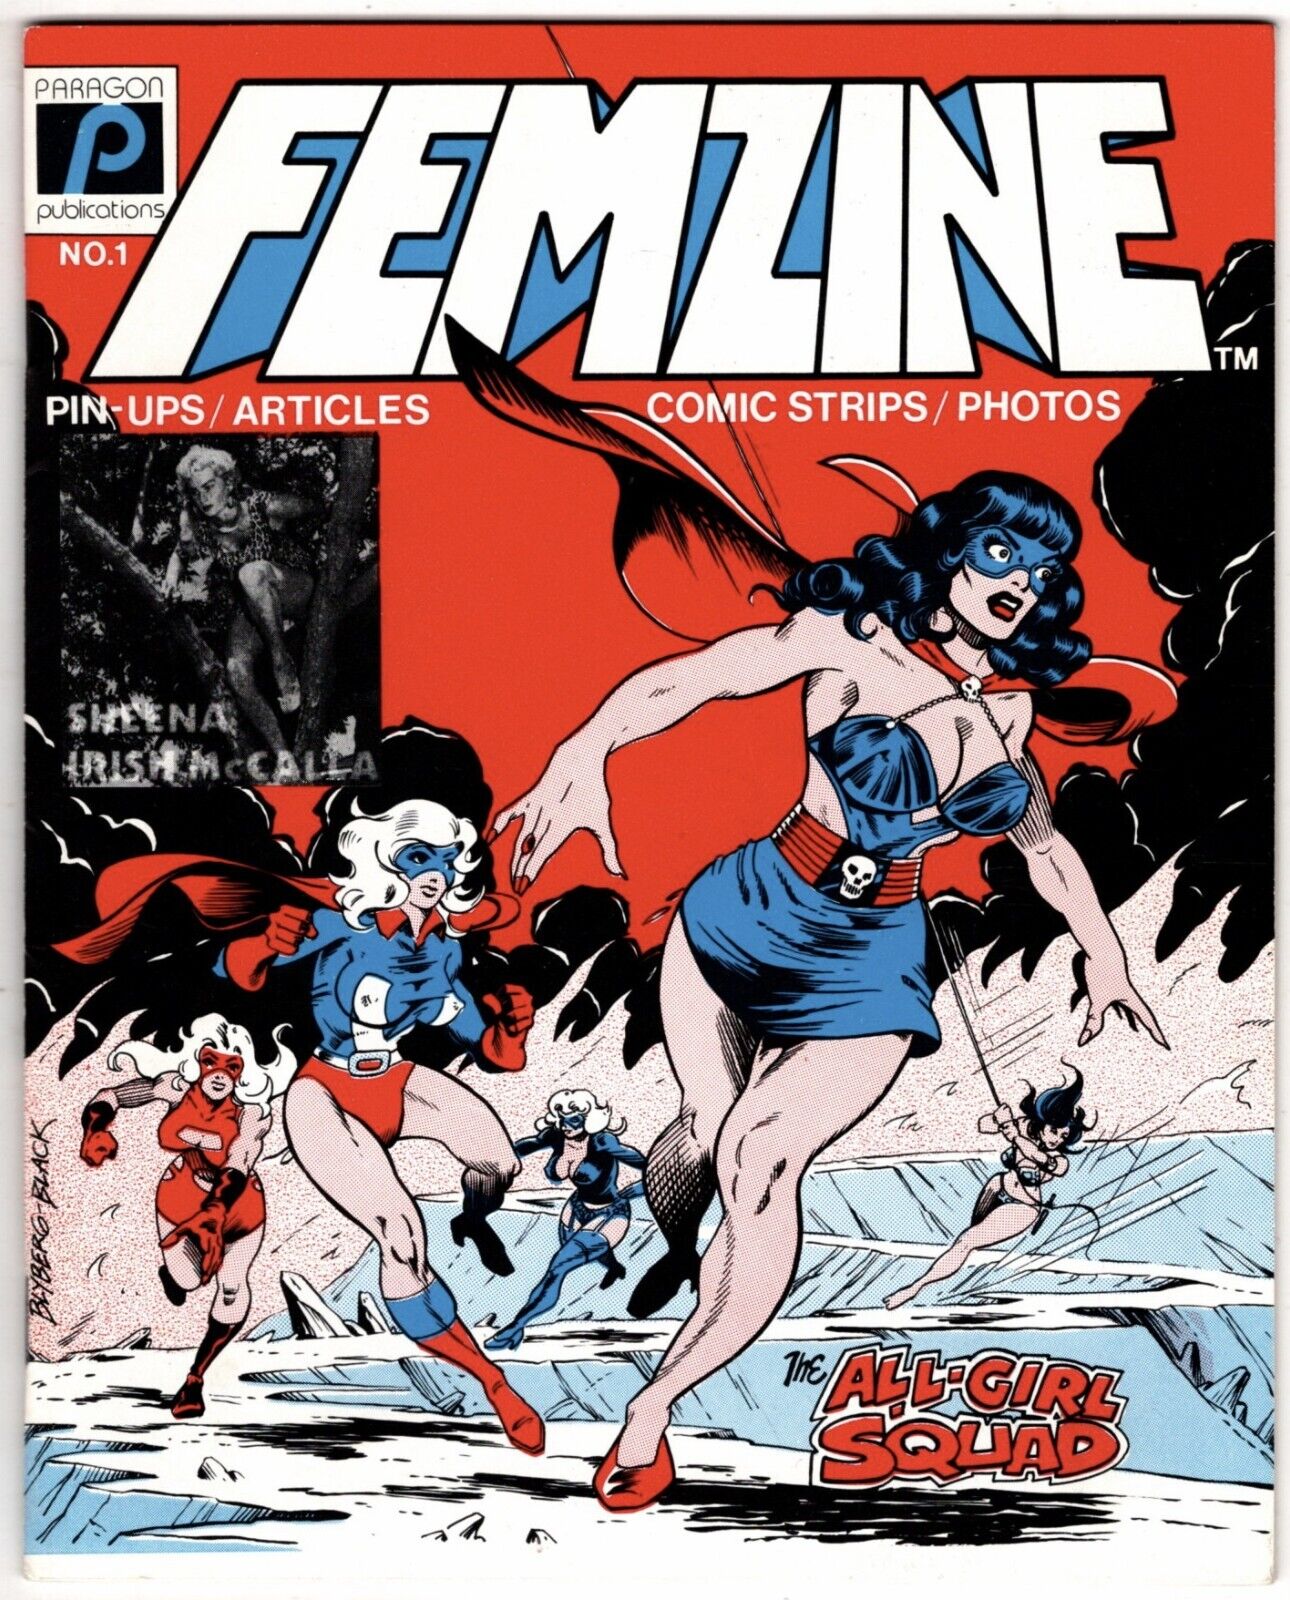 FEMZINE, No 1, 1981, Paragon Publications VERY RARE in this condition.